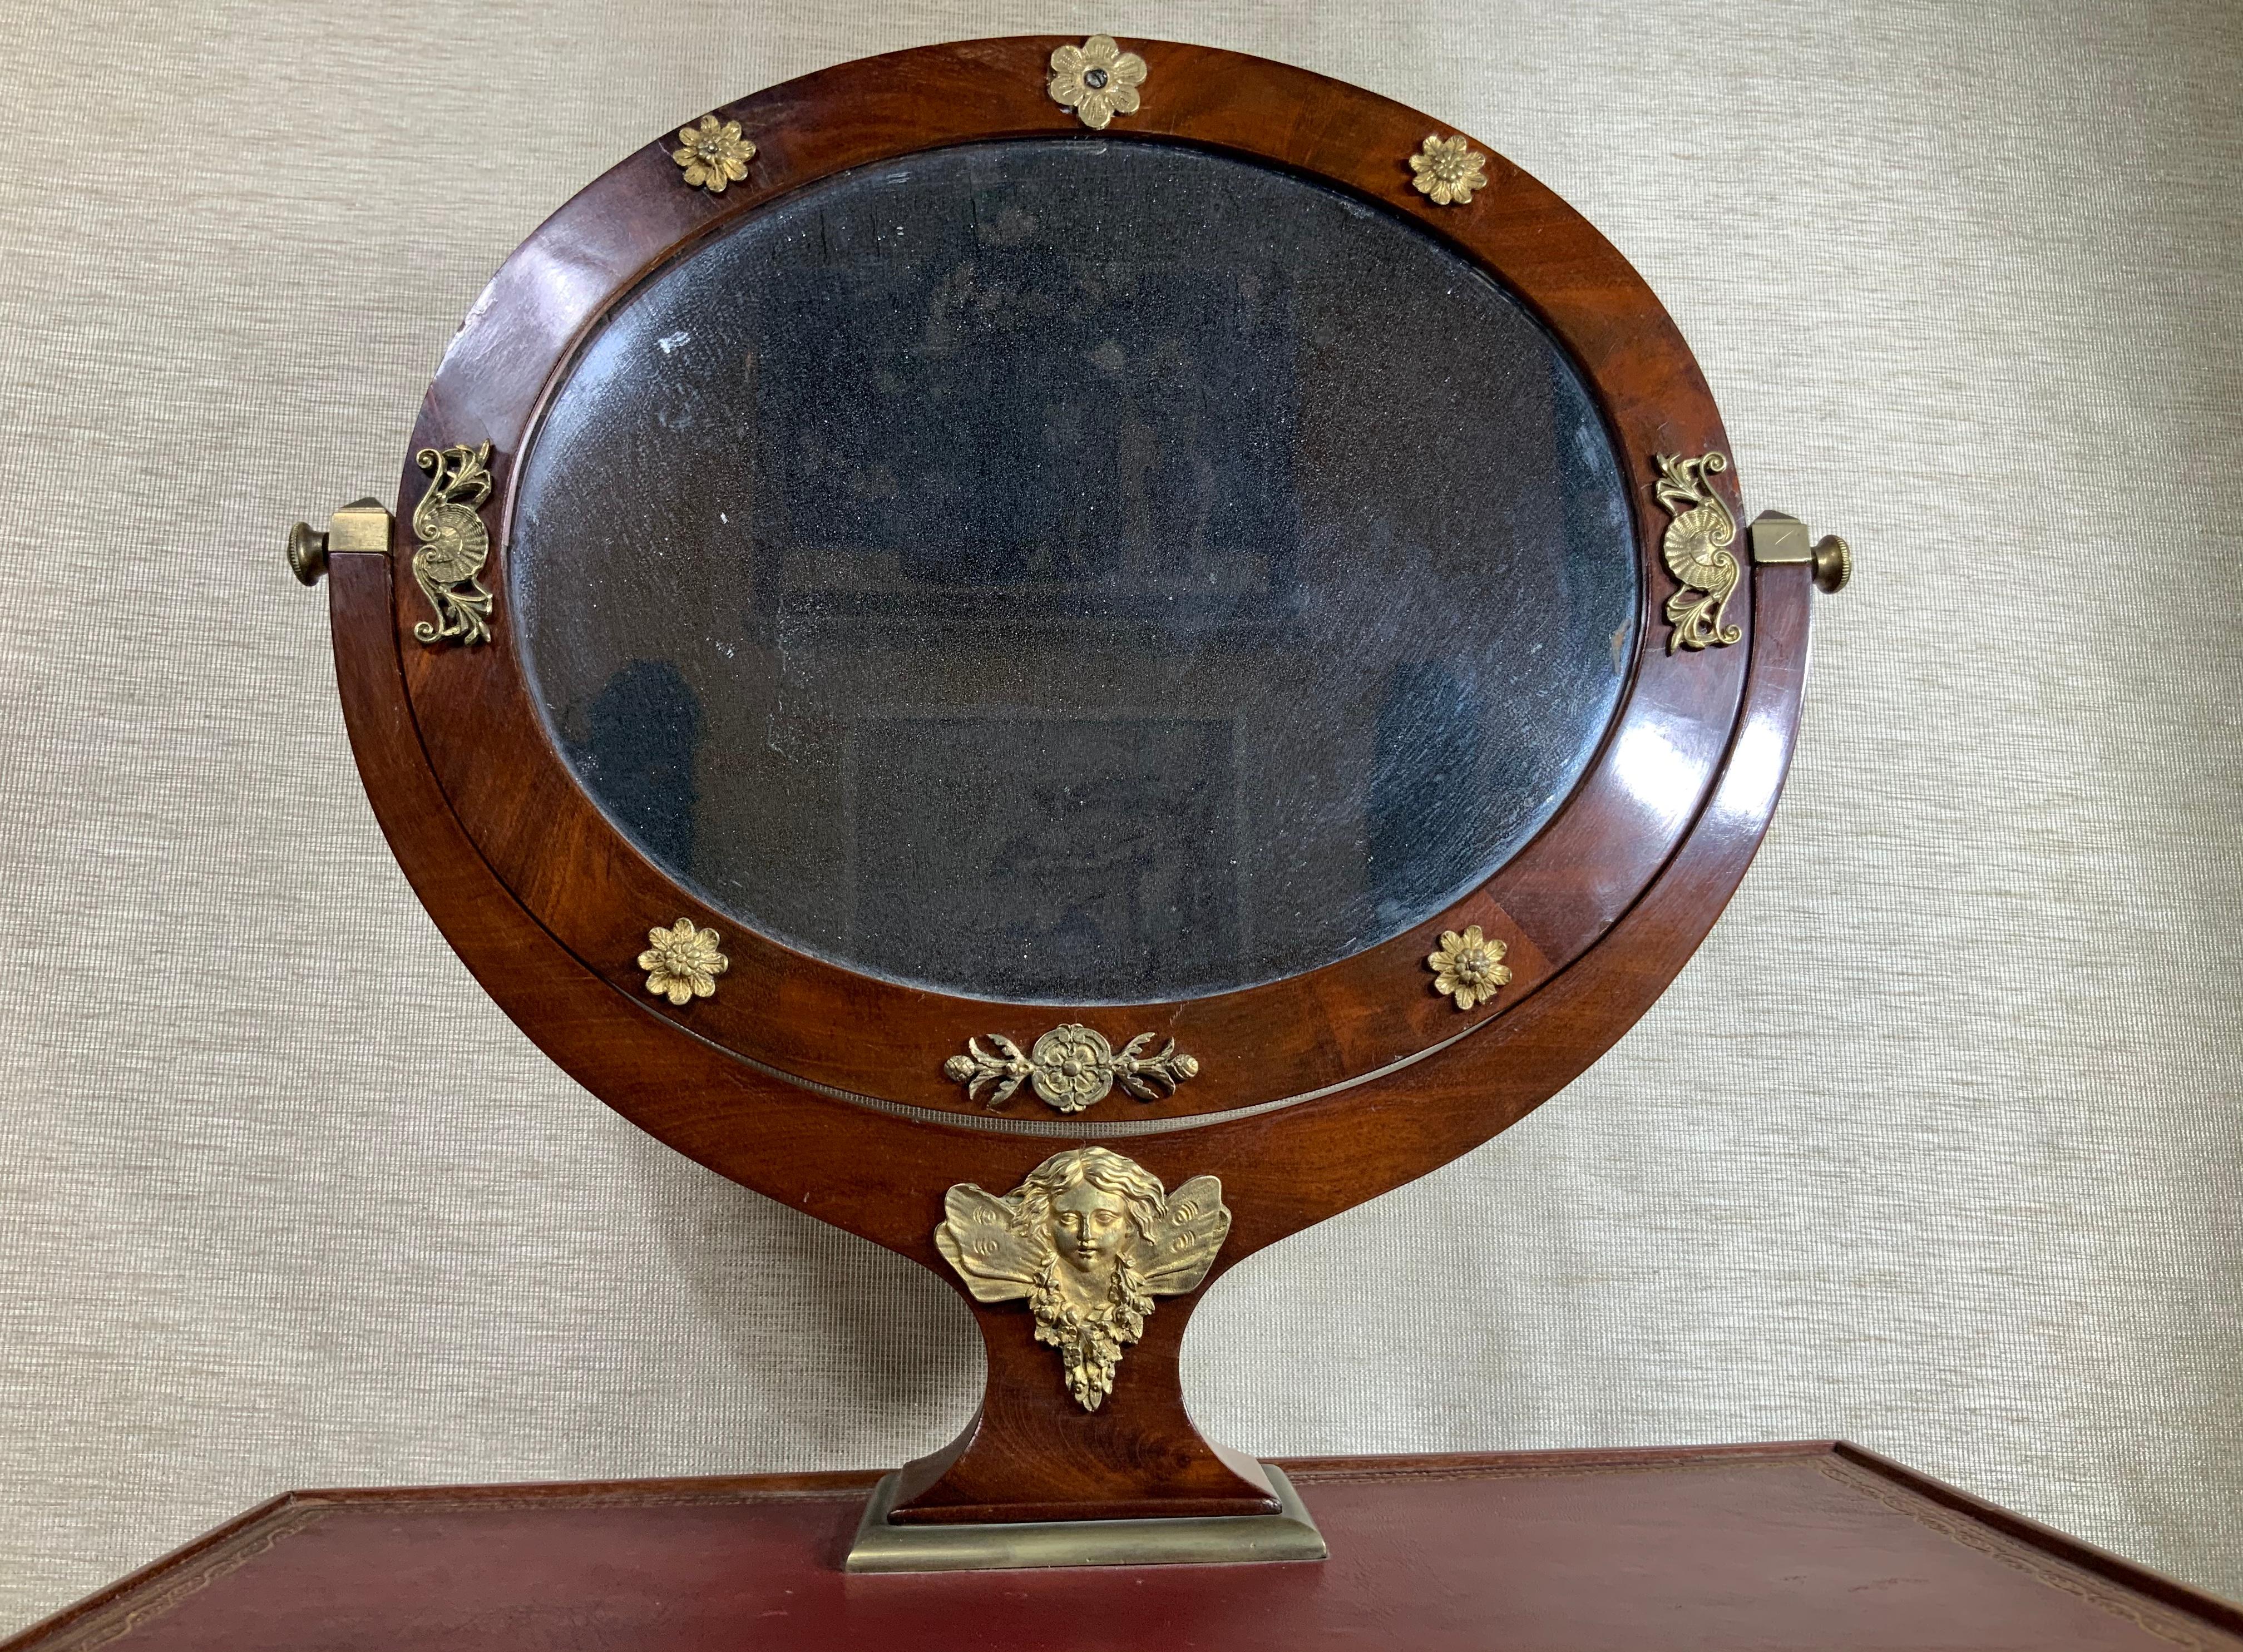 Elegant petite French vanity made of wood cover with leather top beautiful veneer and remarkable bronze accent decoration original color finish.
Beautiful oval shape frosted original mirror, hey single drawer with walking keylock. Four straight